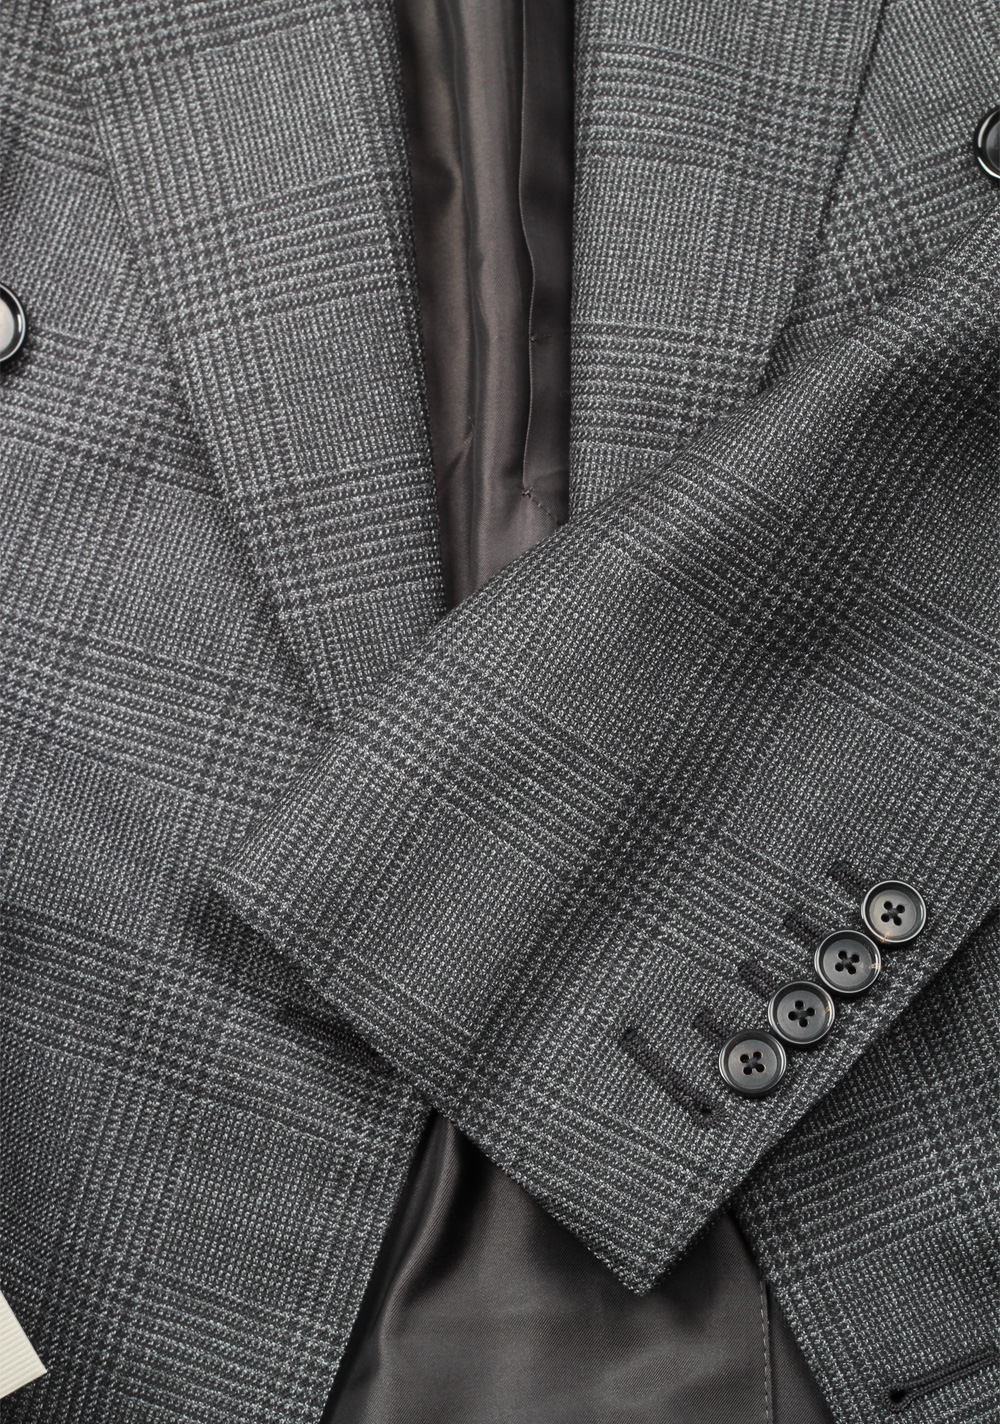 TOM FORD Shelton Checked Double Breasted Gray Suit Size 48 / 38R U.S. In Mohair Wool | Costume Limité